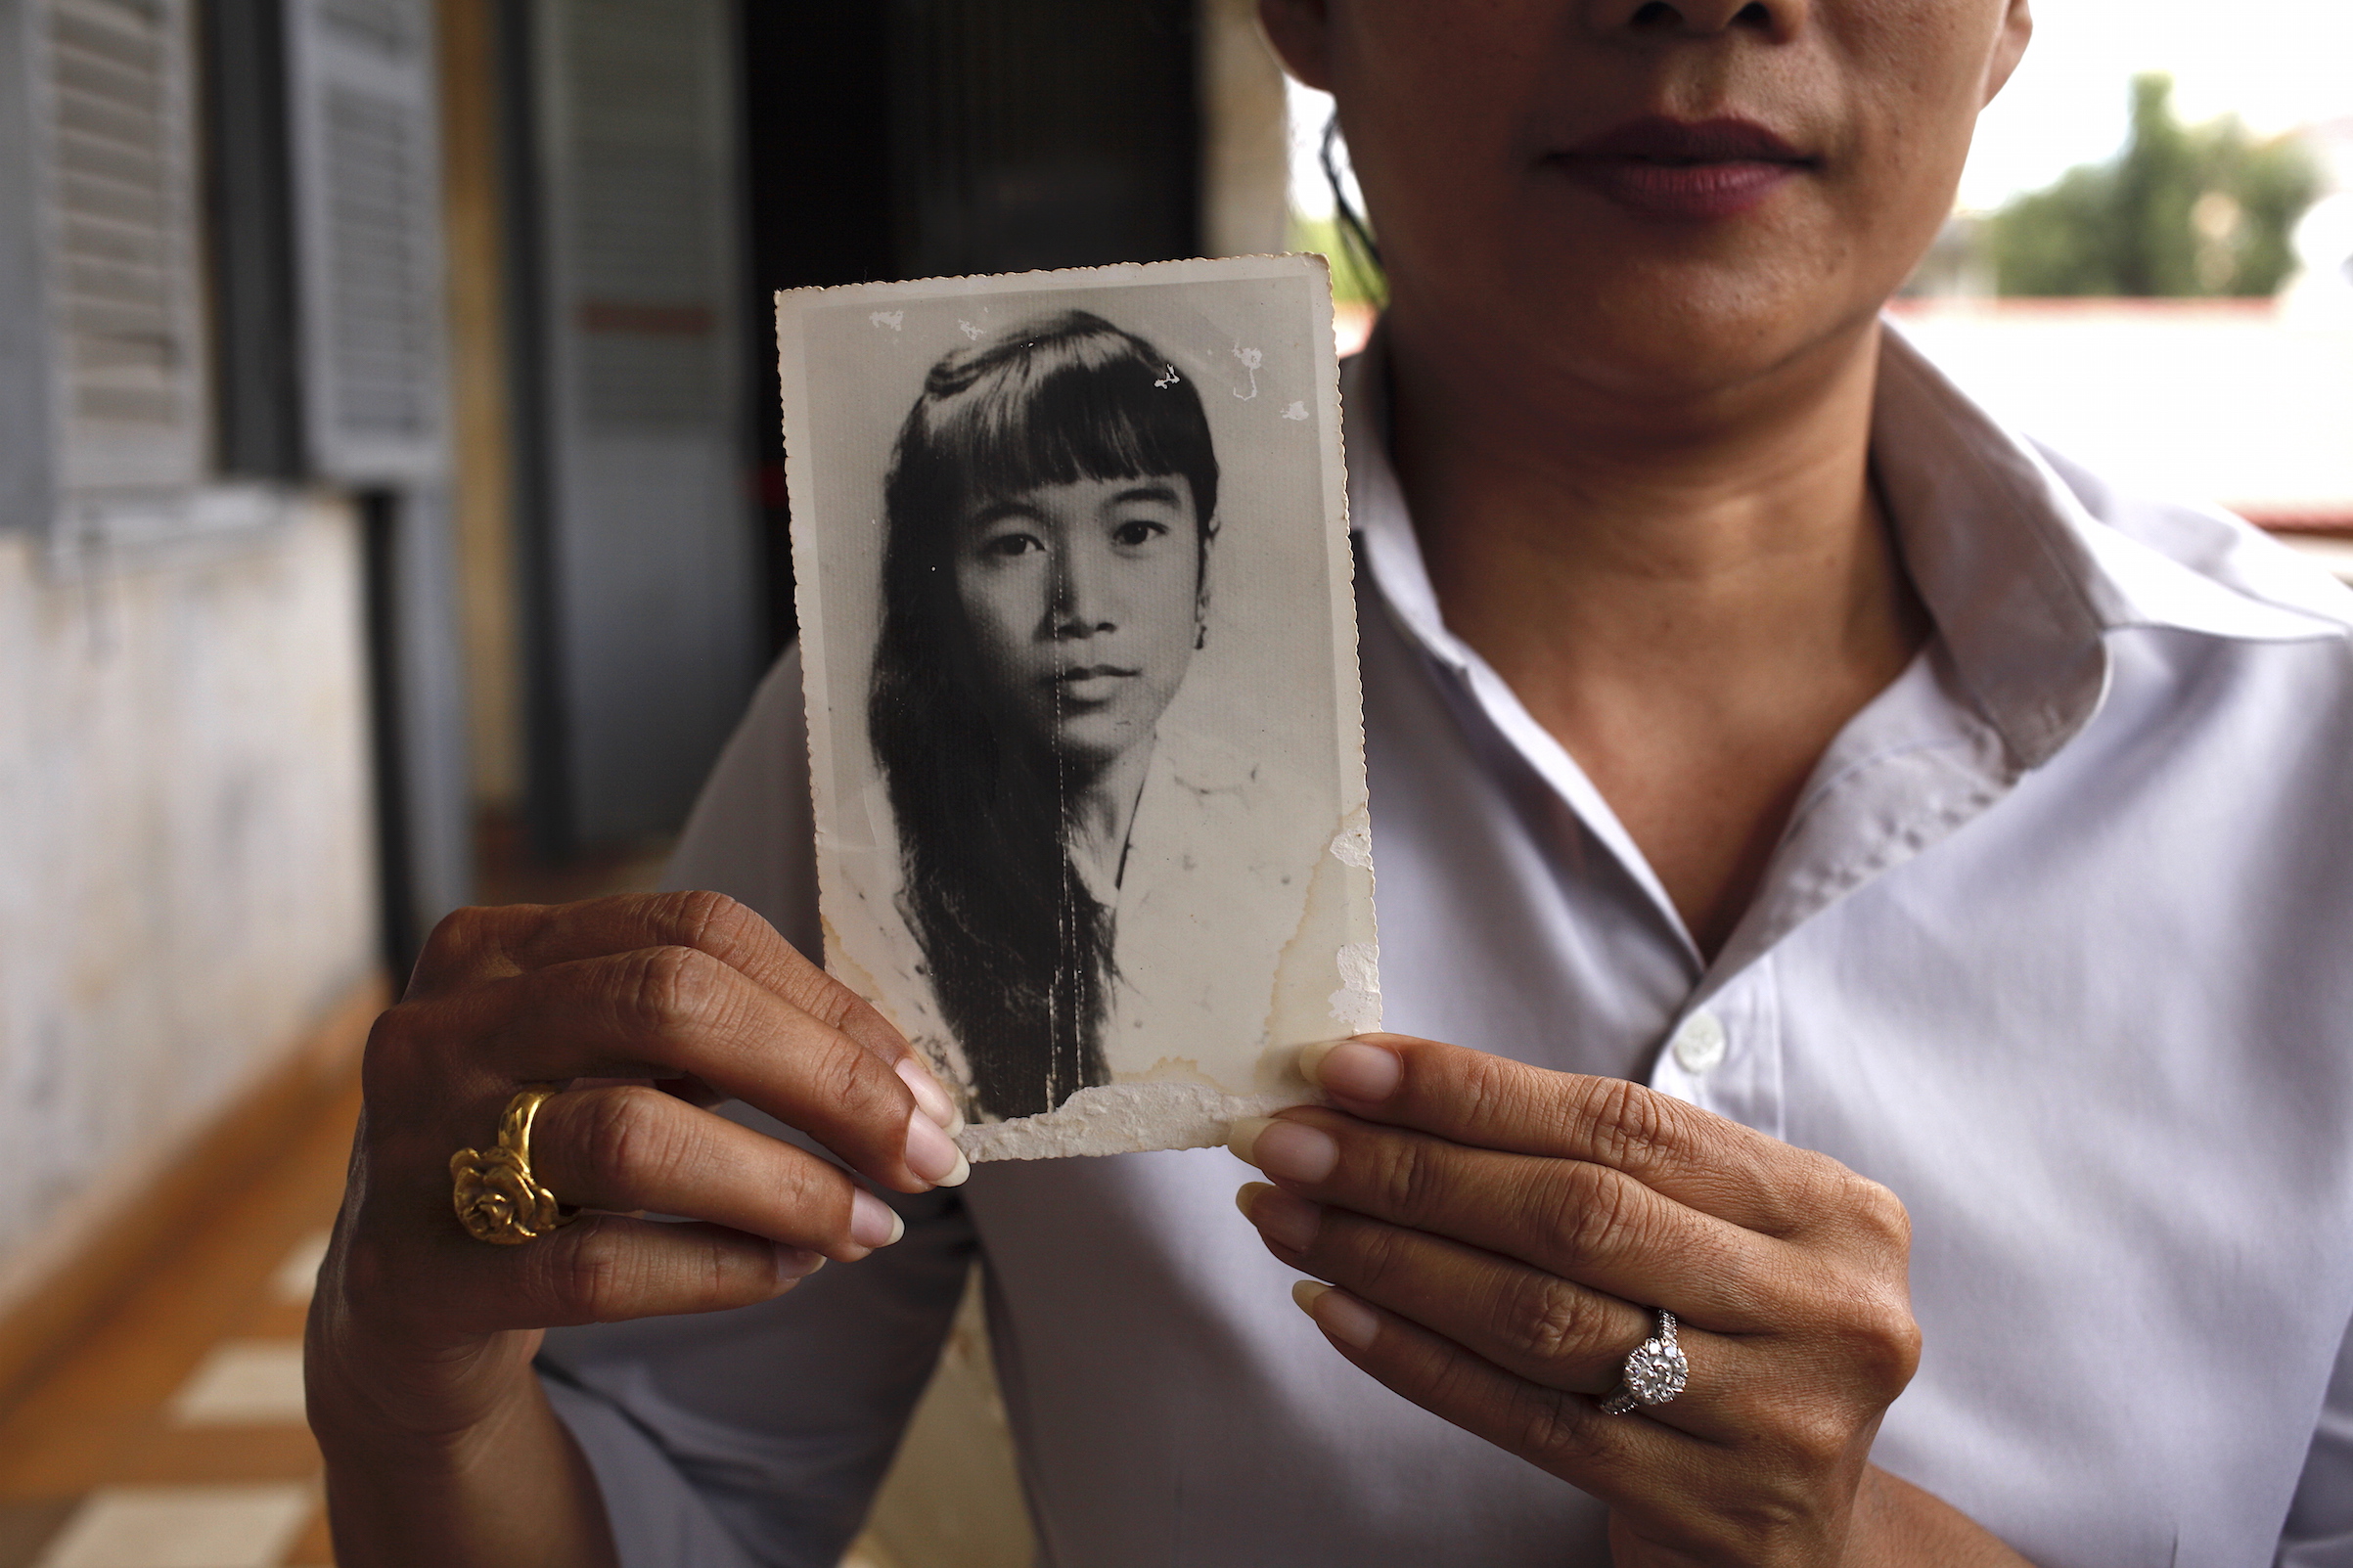 Chheng Samin was born under a pagoda shortly after the fall of Phnom Penh. She holds a picture of her mother, Chheng Samit, who survived the Khmer Rouge but died young. She now works at Tuol Sleng. (Photographer: Andy Kopsa)